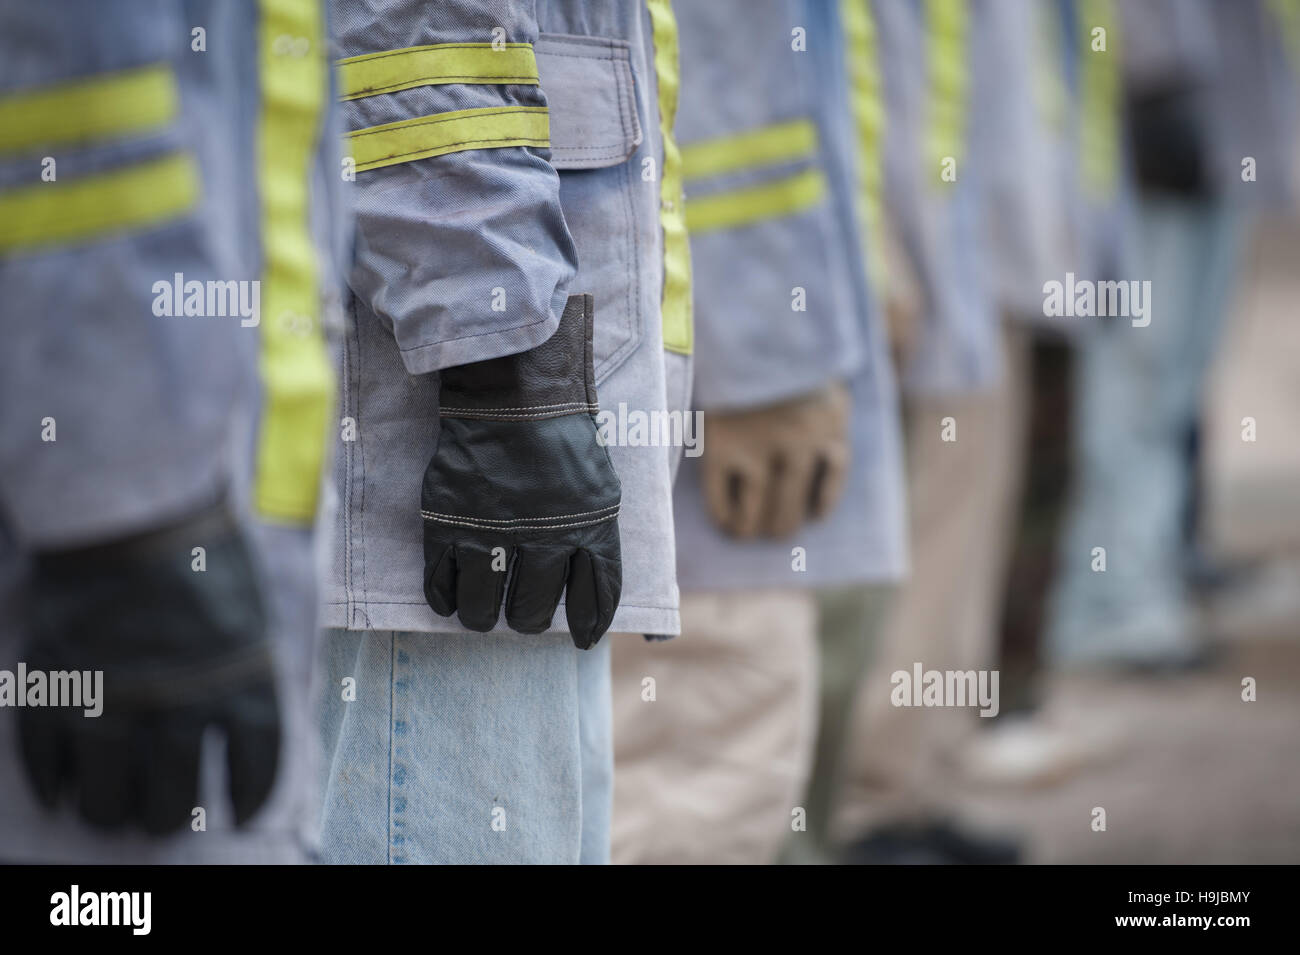 firefighters and gloves Stock Photo